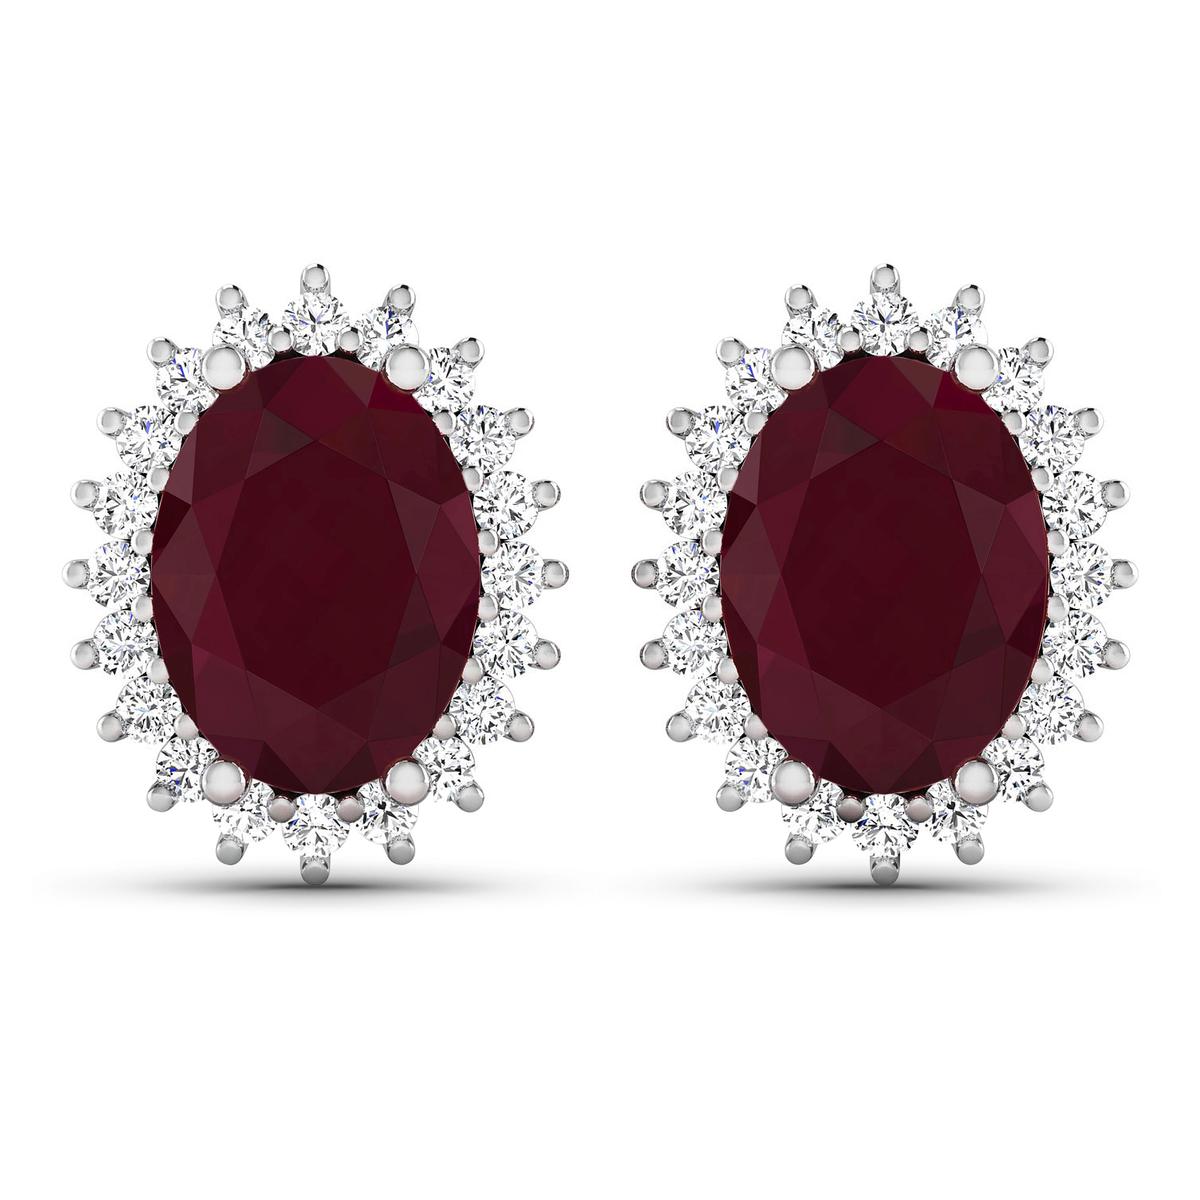 14KT White Gold 3.00ctw Ruby and Diamond Earrings